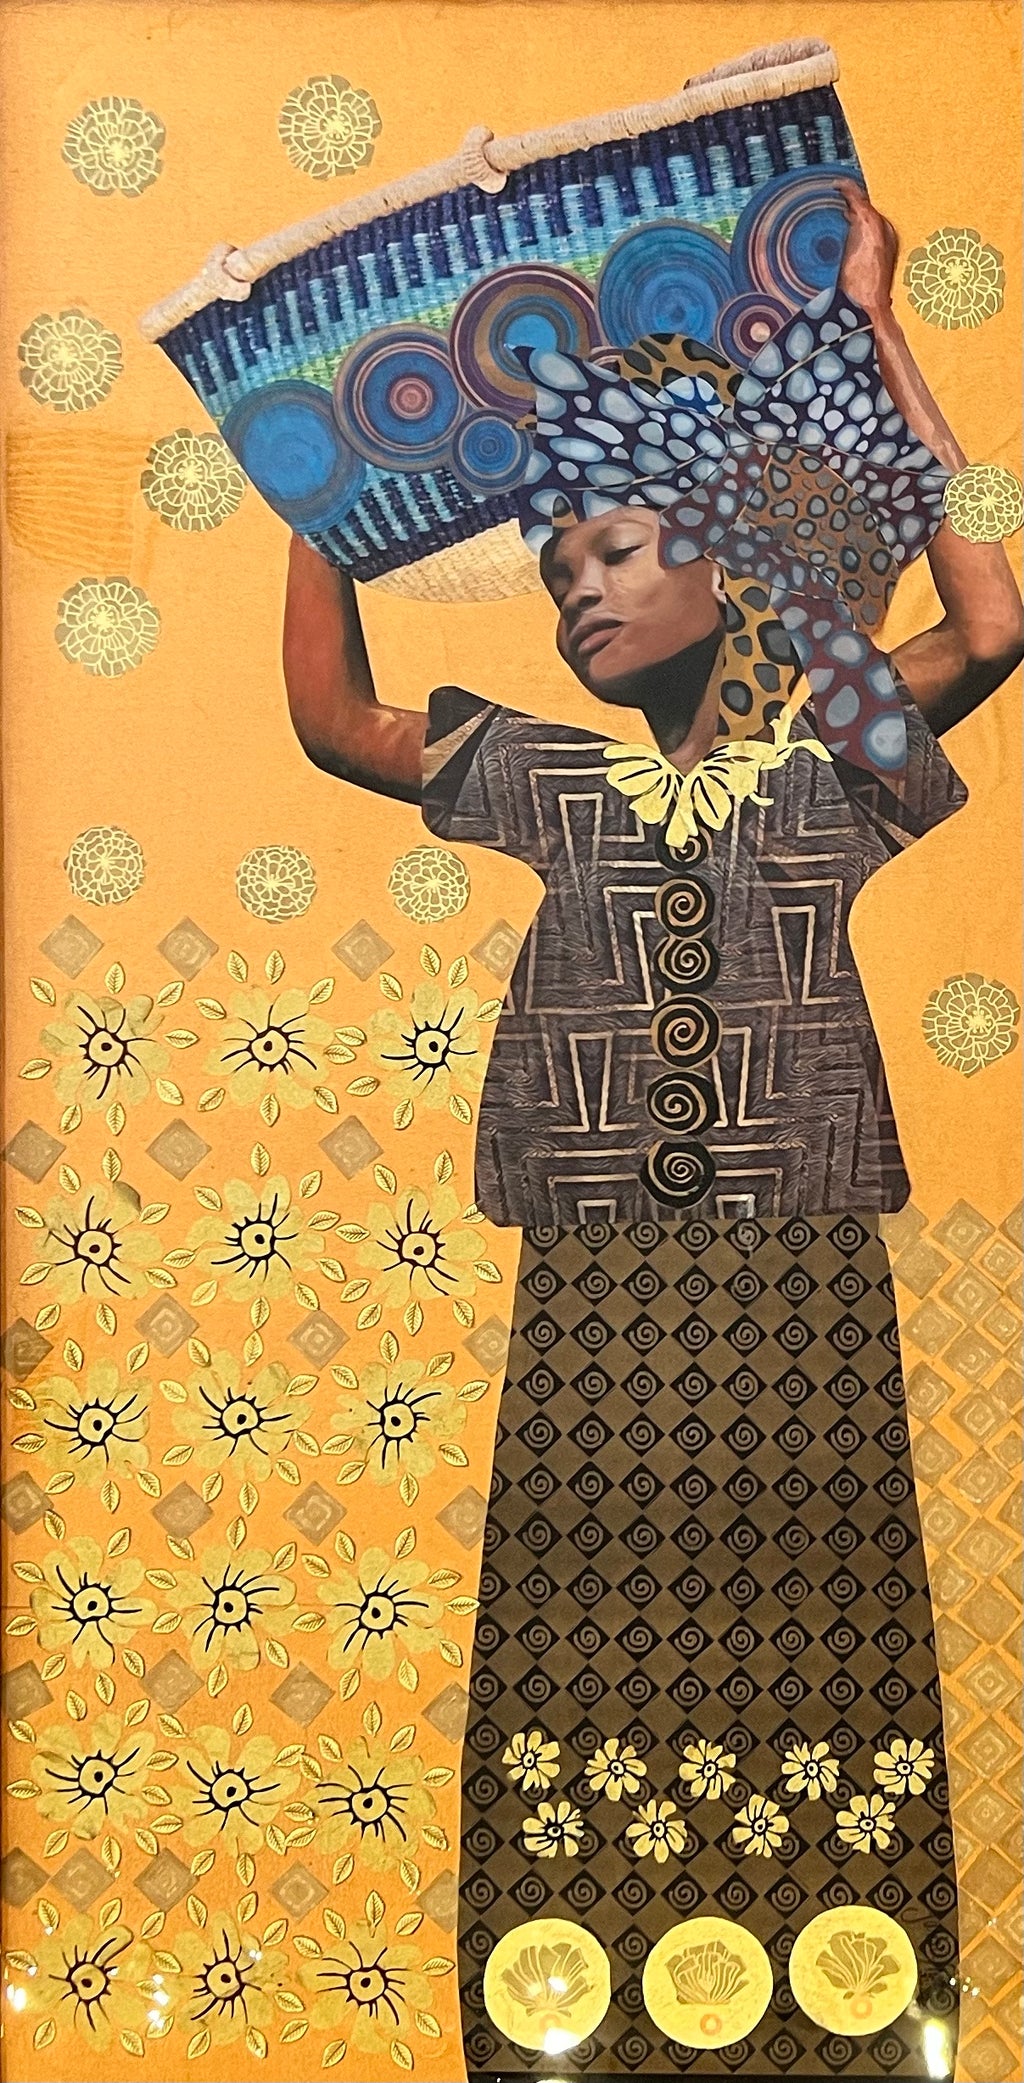 mixed media painting of a woman holding of a woven basket on a yellow textured background